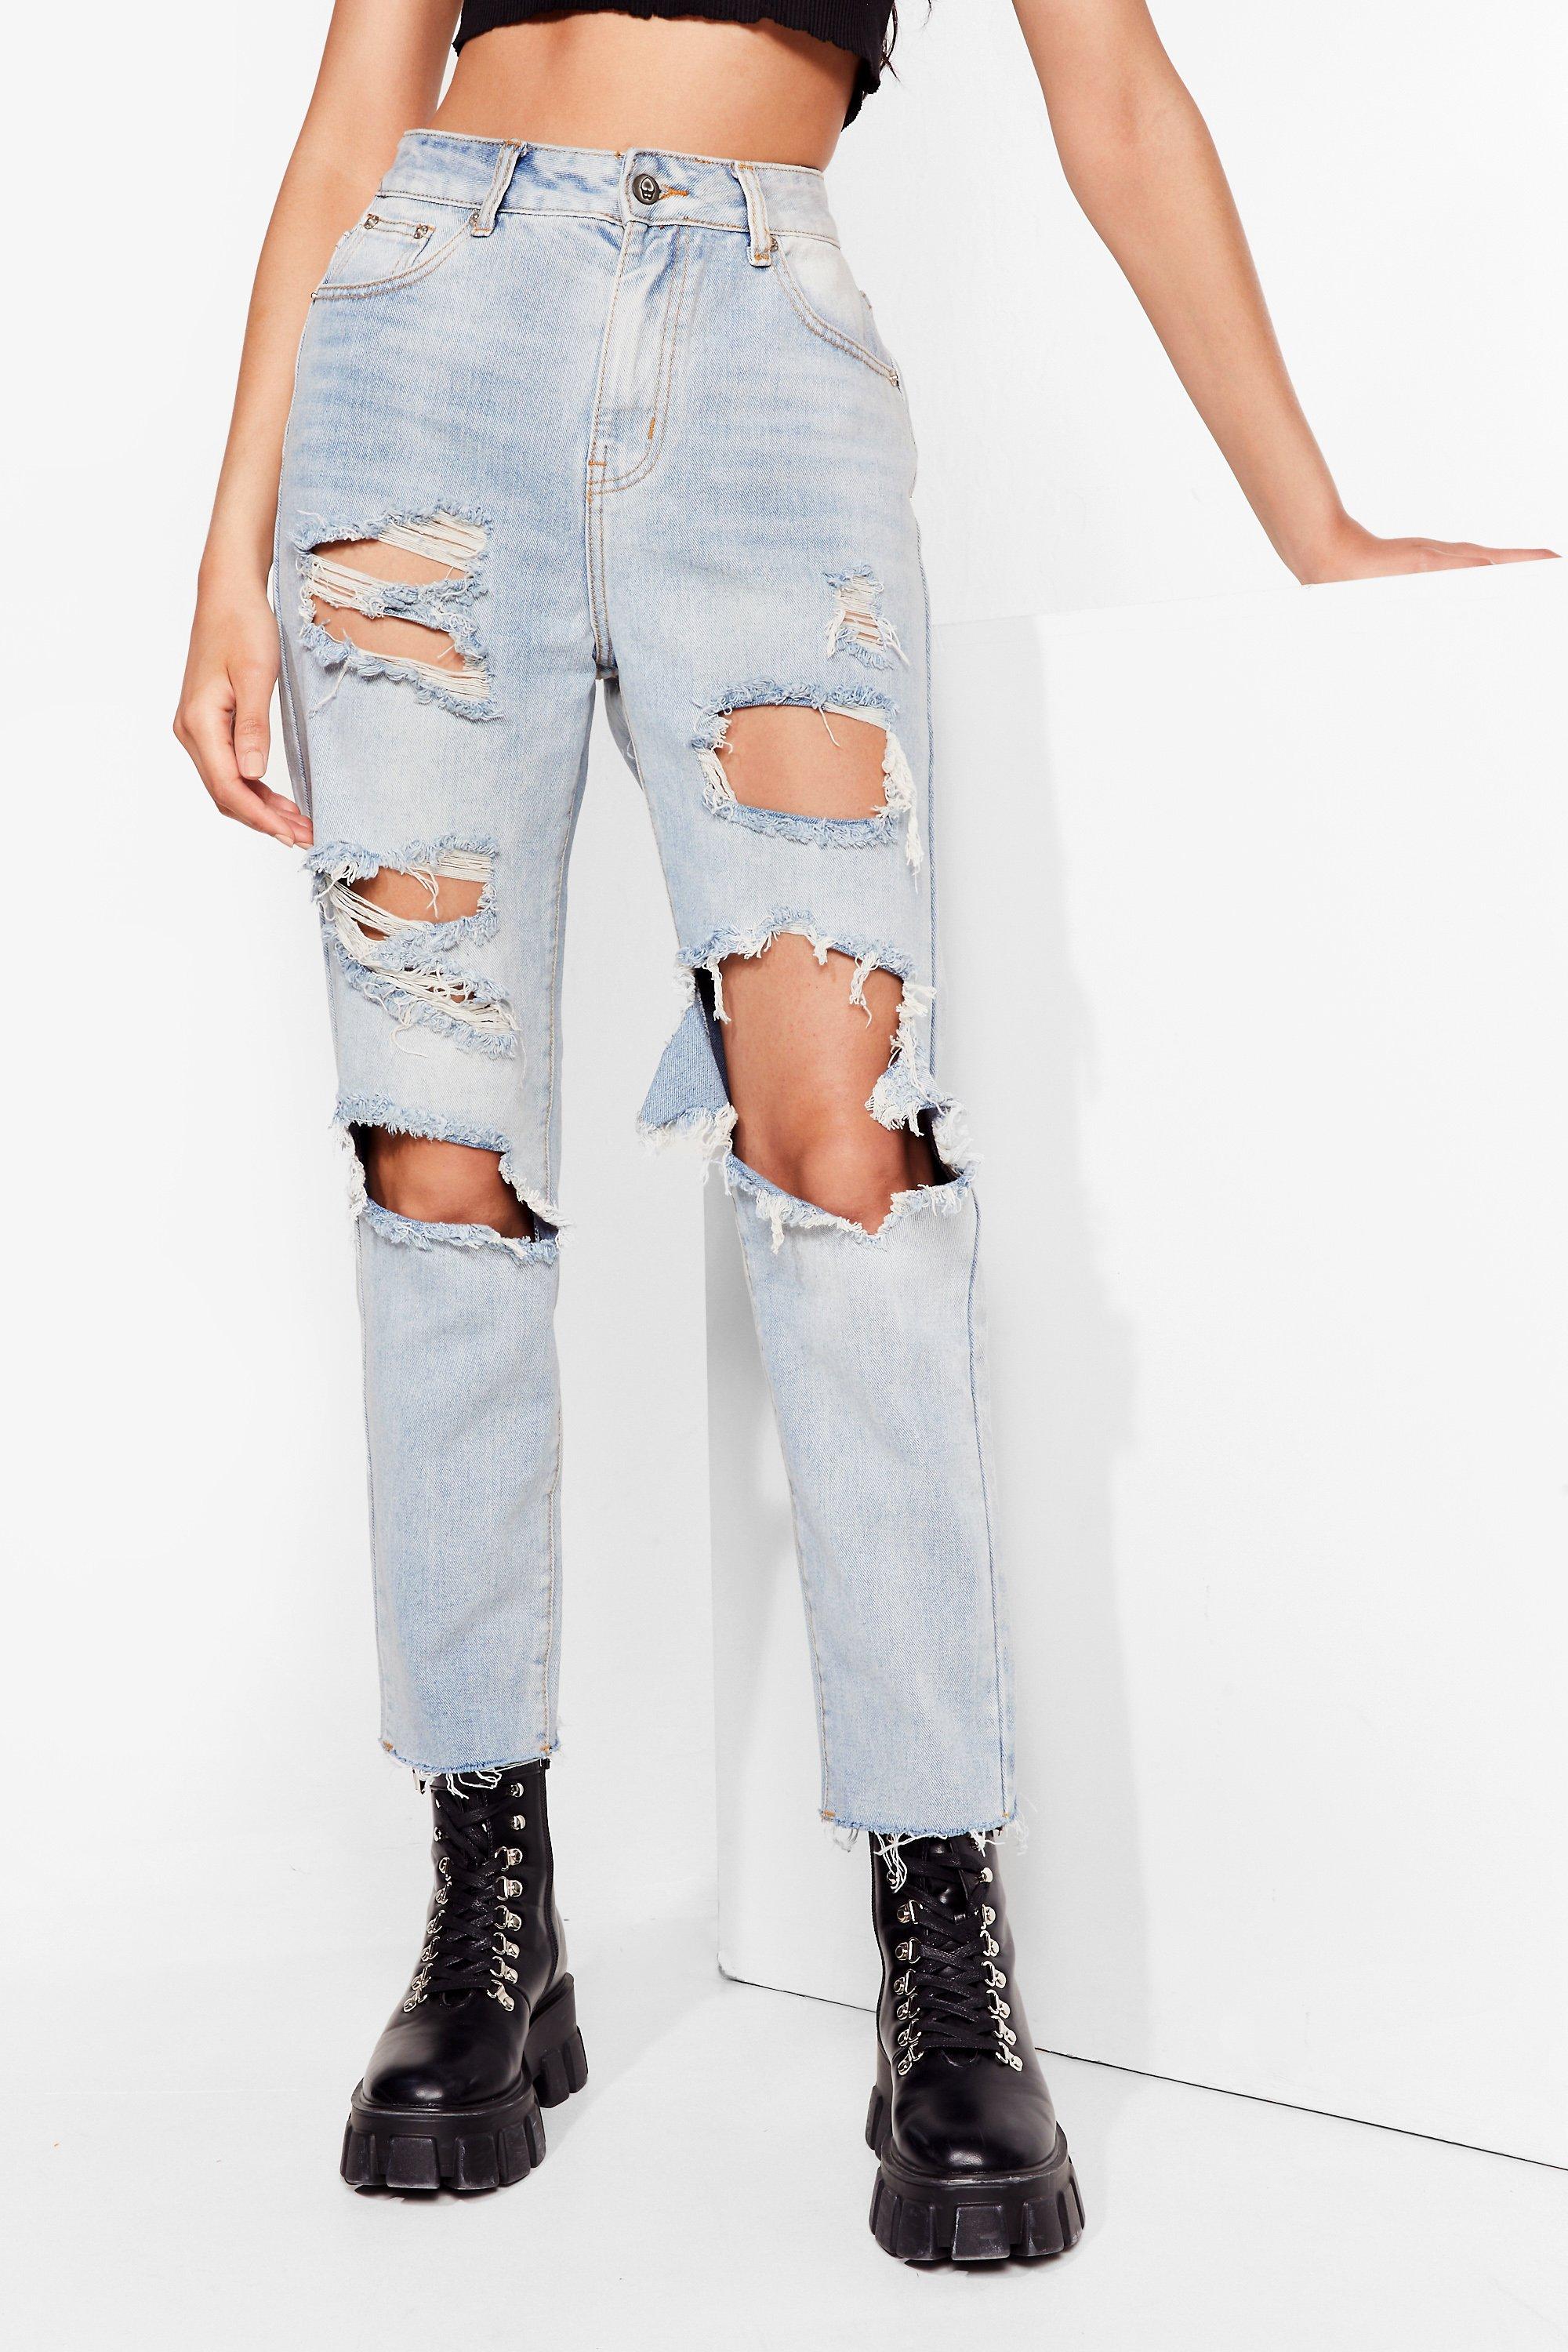 cheap distressed jeans